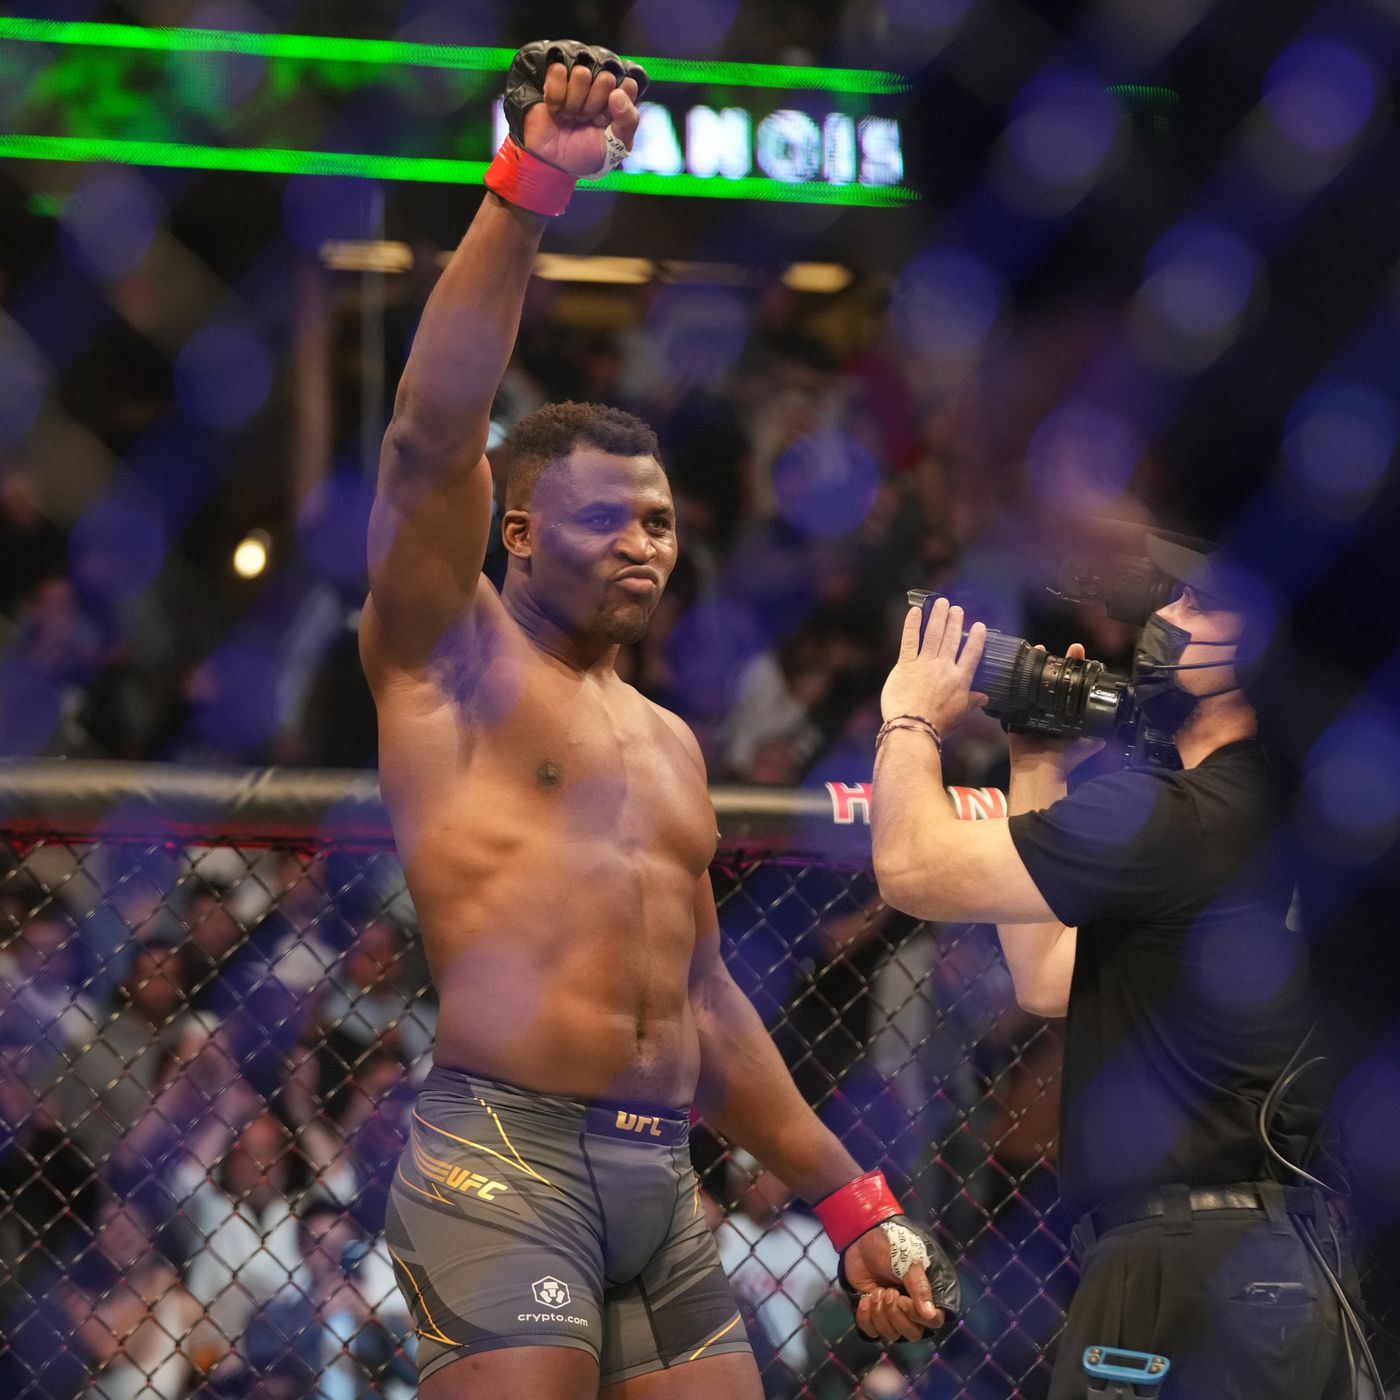 Francis Ngannou on $8 million UFC offer: The Predator reveals receiving a multi-fight deal from Dana White